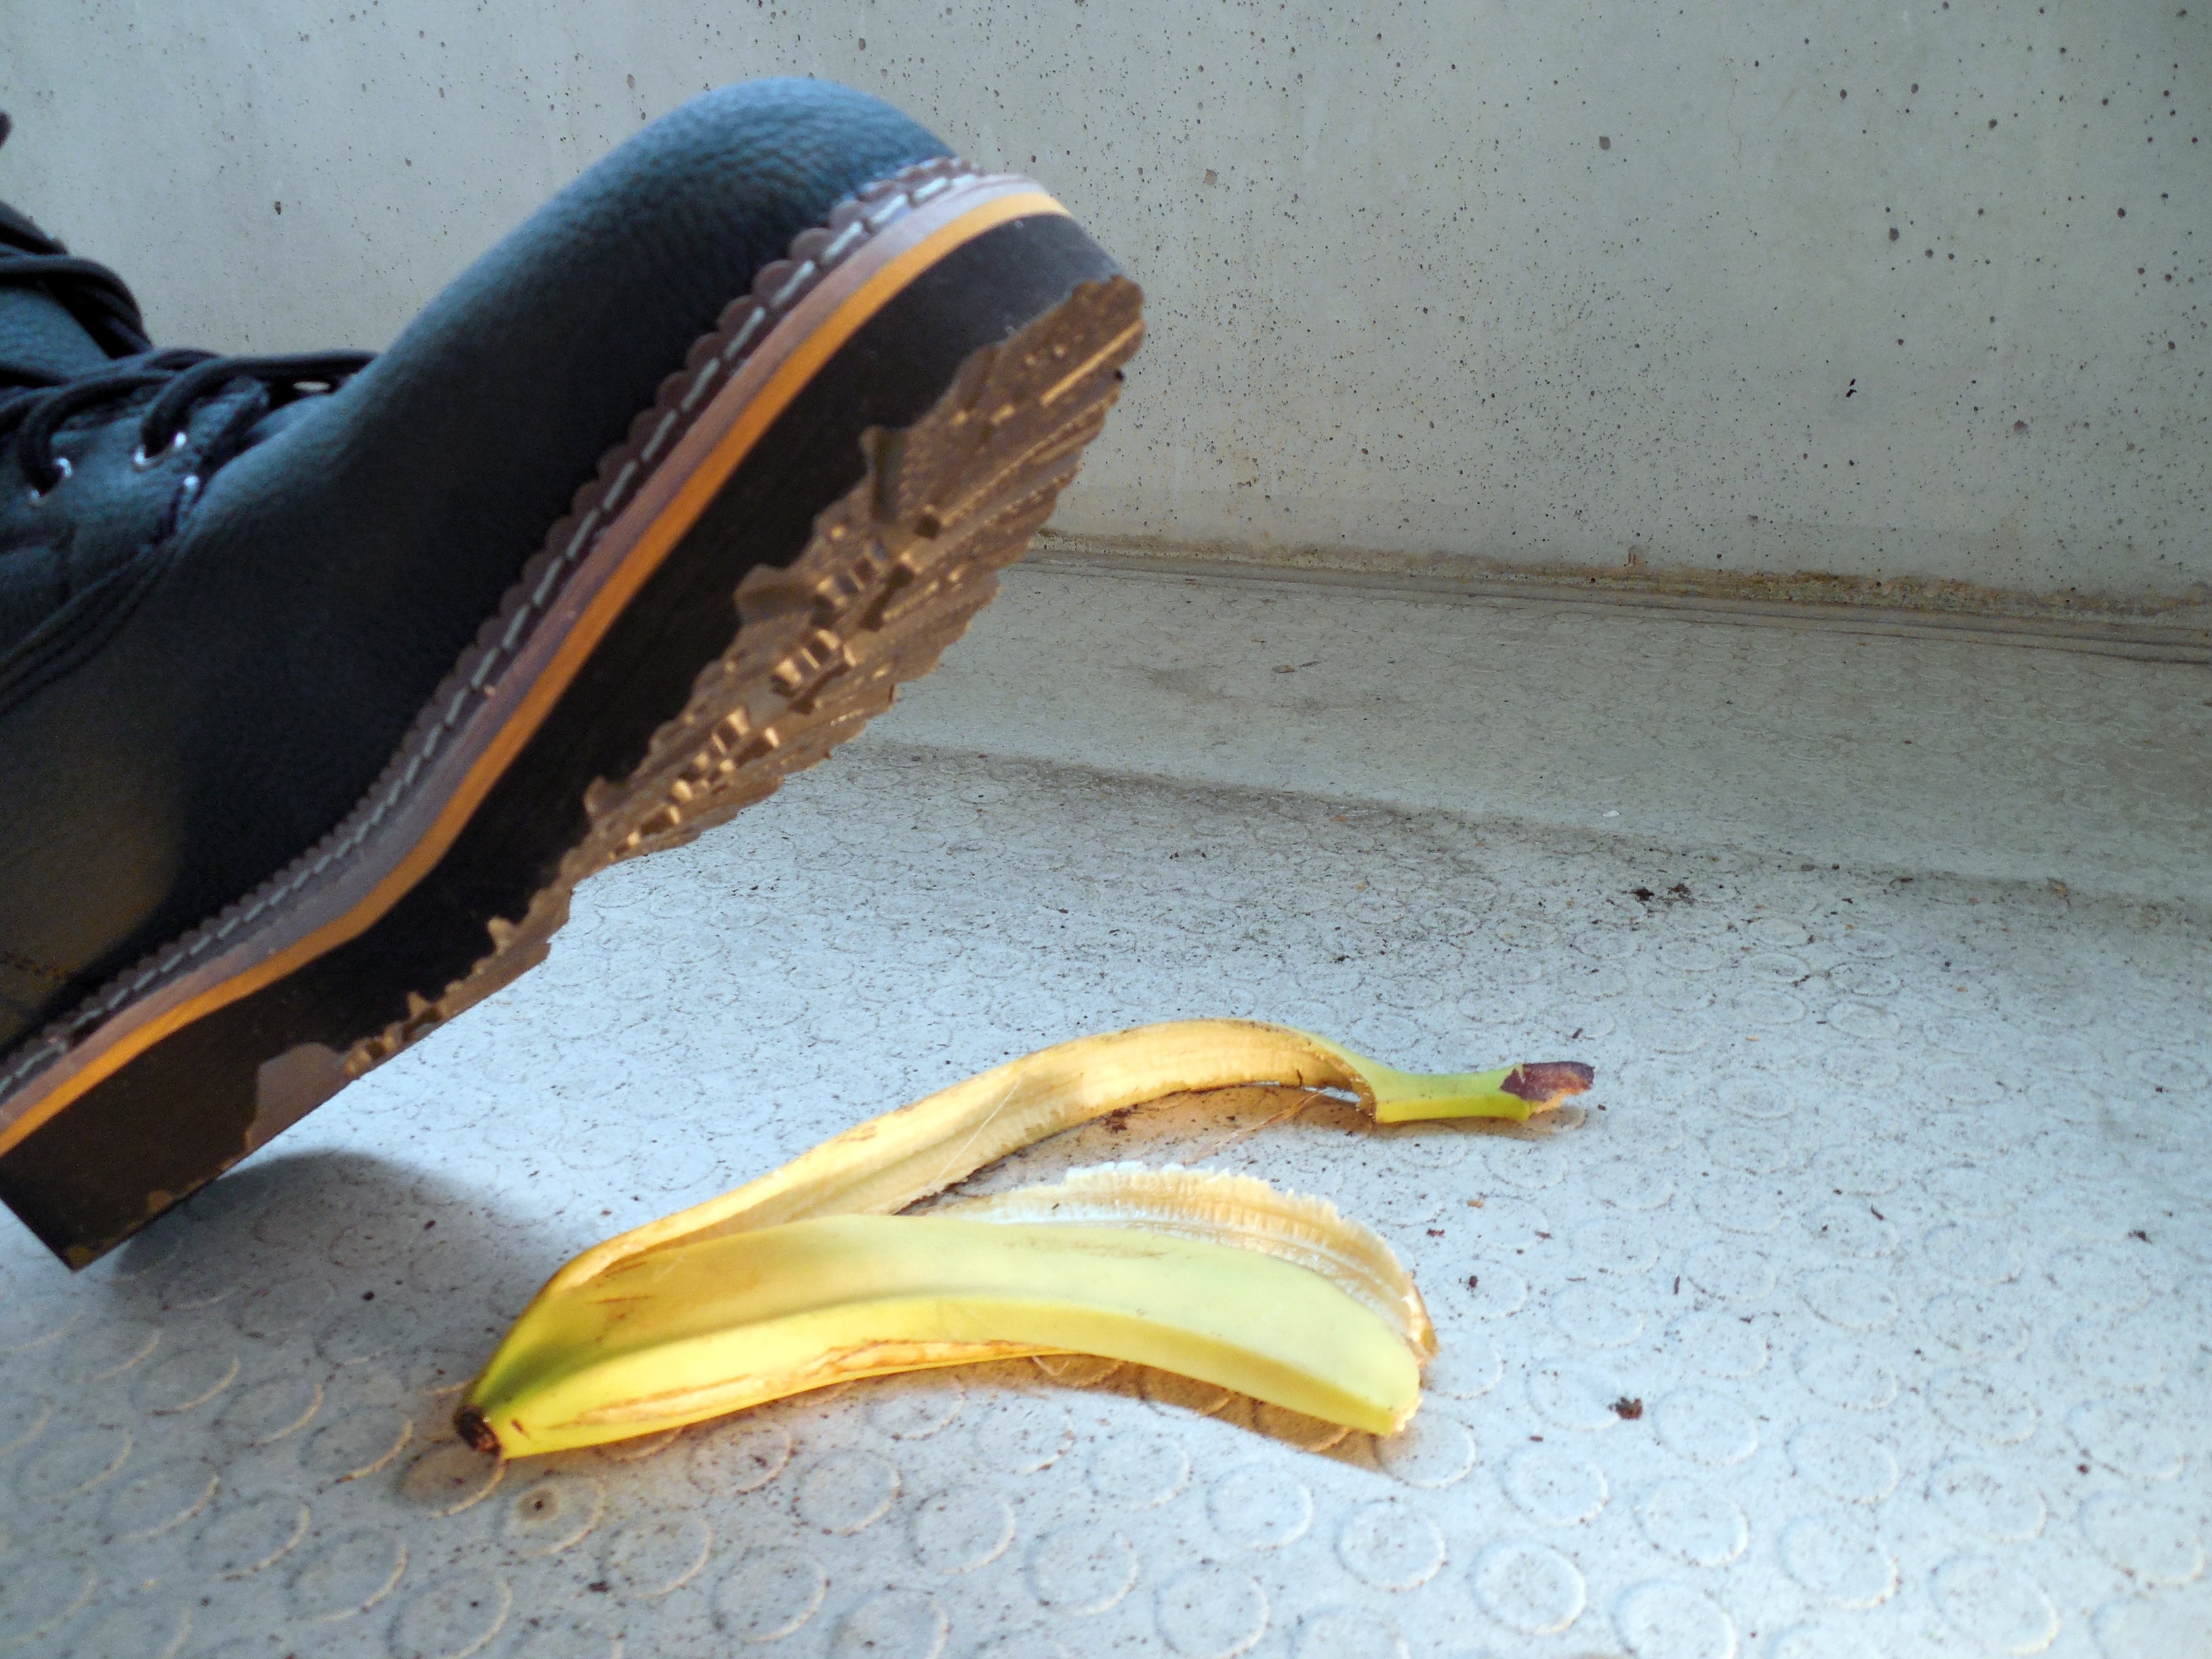 person in black shoes stepping on yellow banana peel